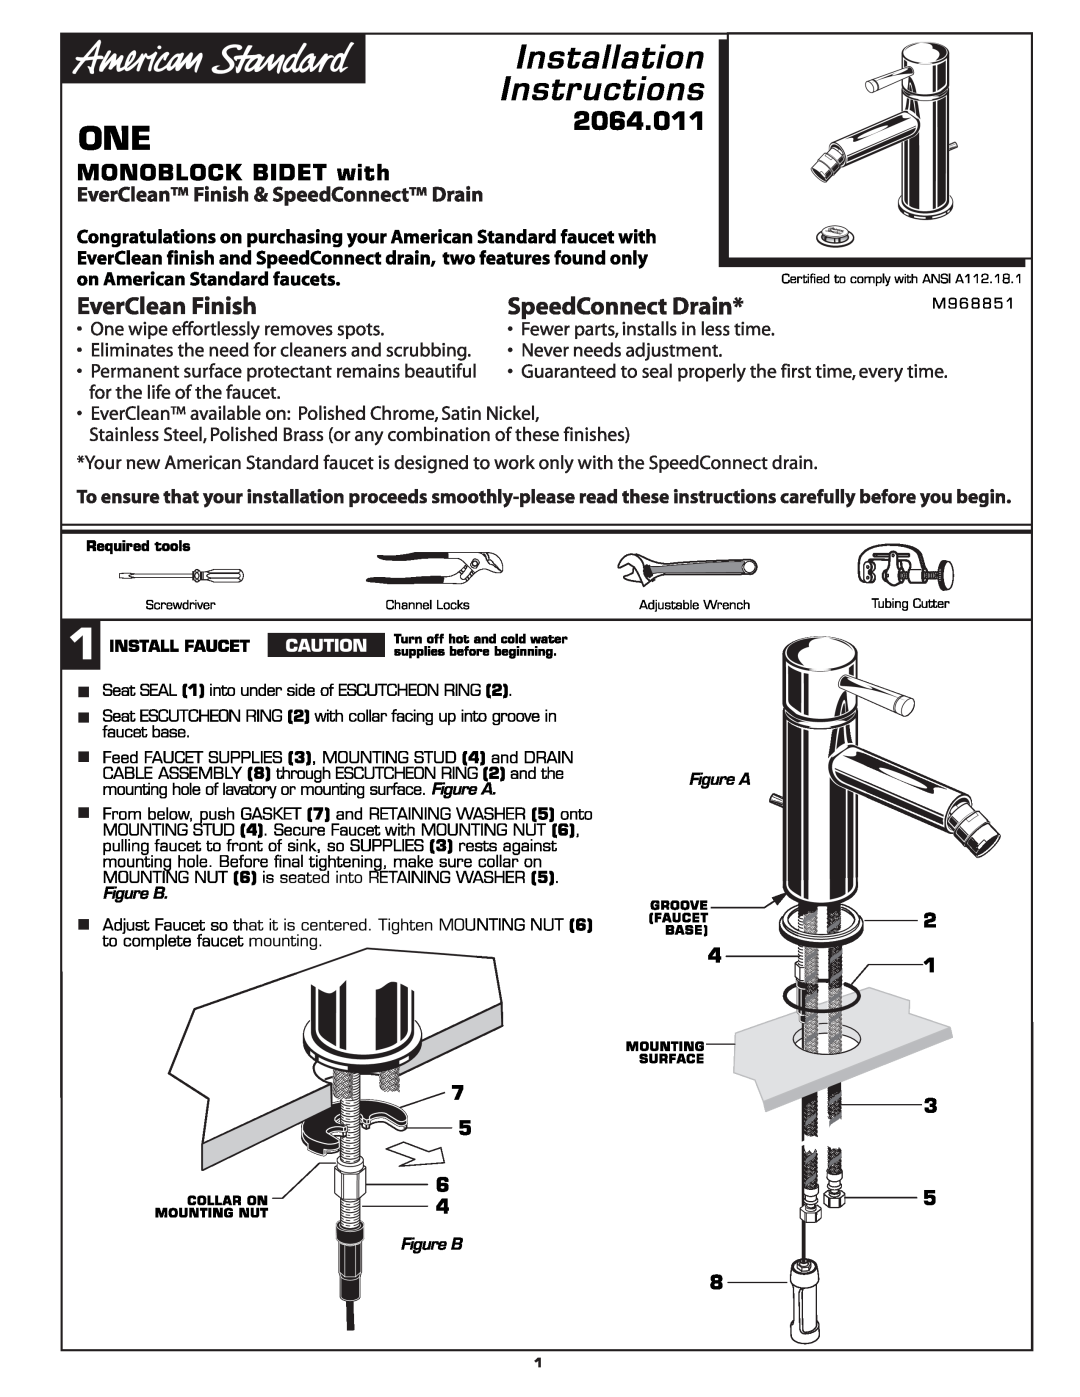 American Standard 2064.011 installation instructions MONOBLOCK BIDET with Speed Connect Drain, Install Faucet, Serin 